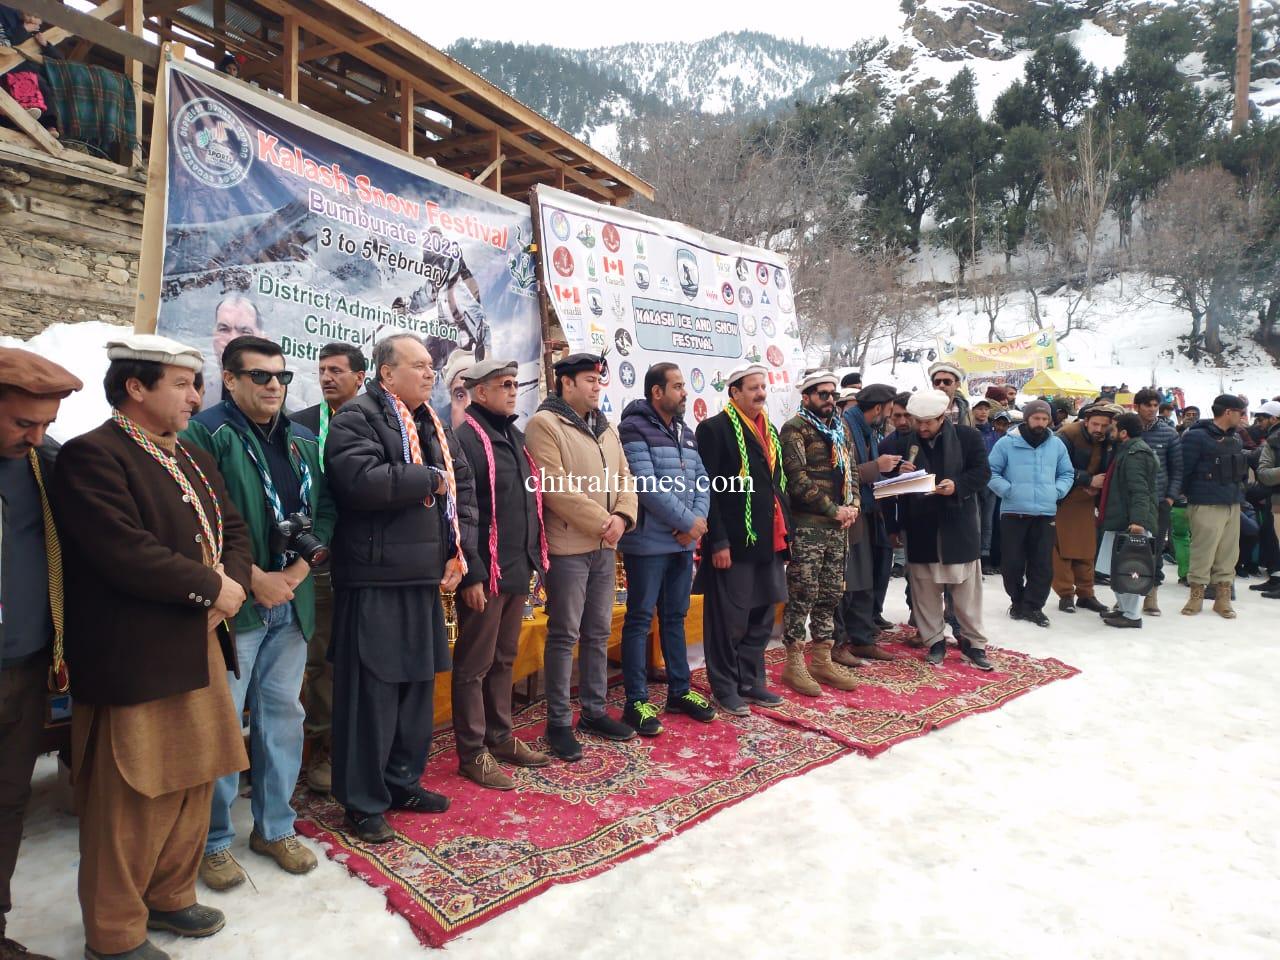 chitraltimes kalash snow sports festival concludes here in bumburait chitral 3